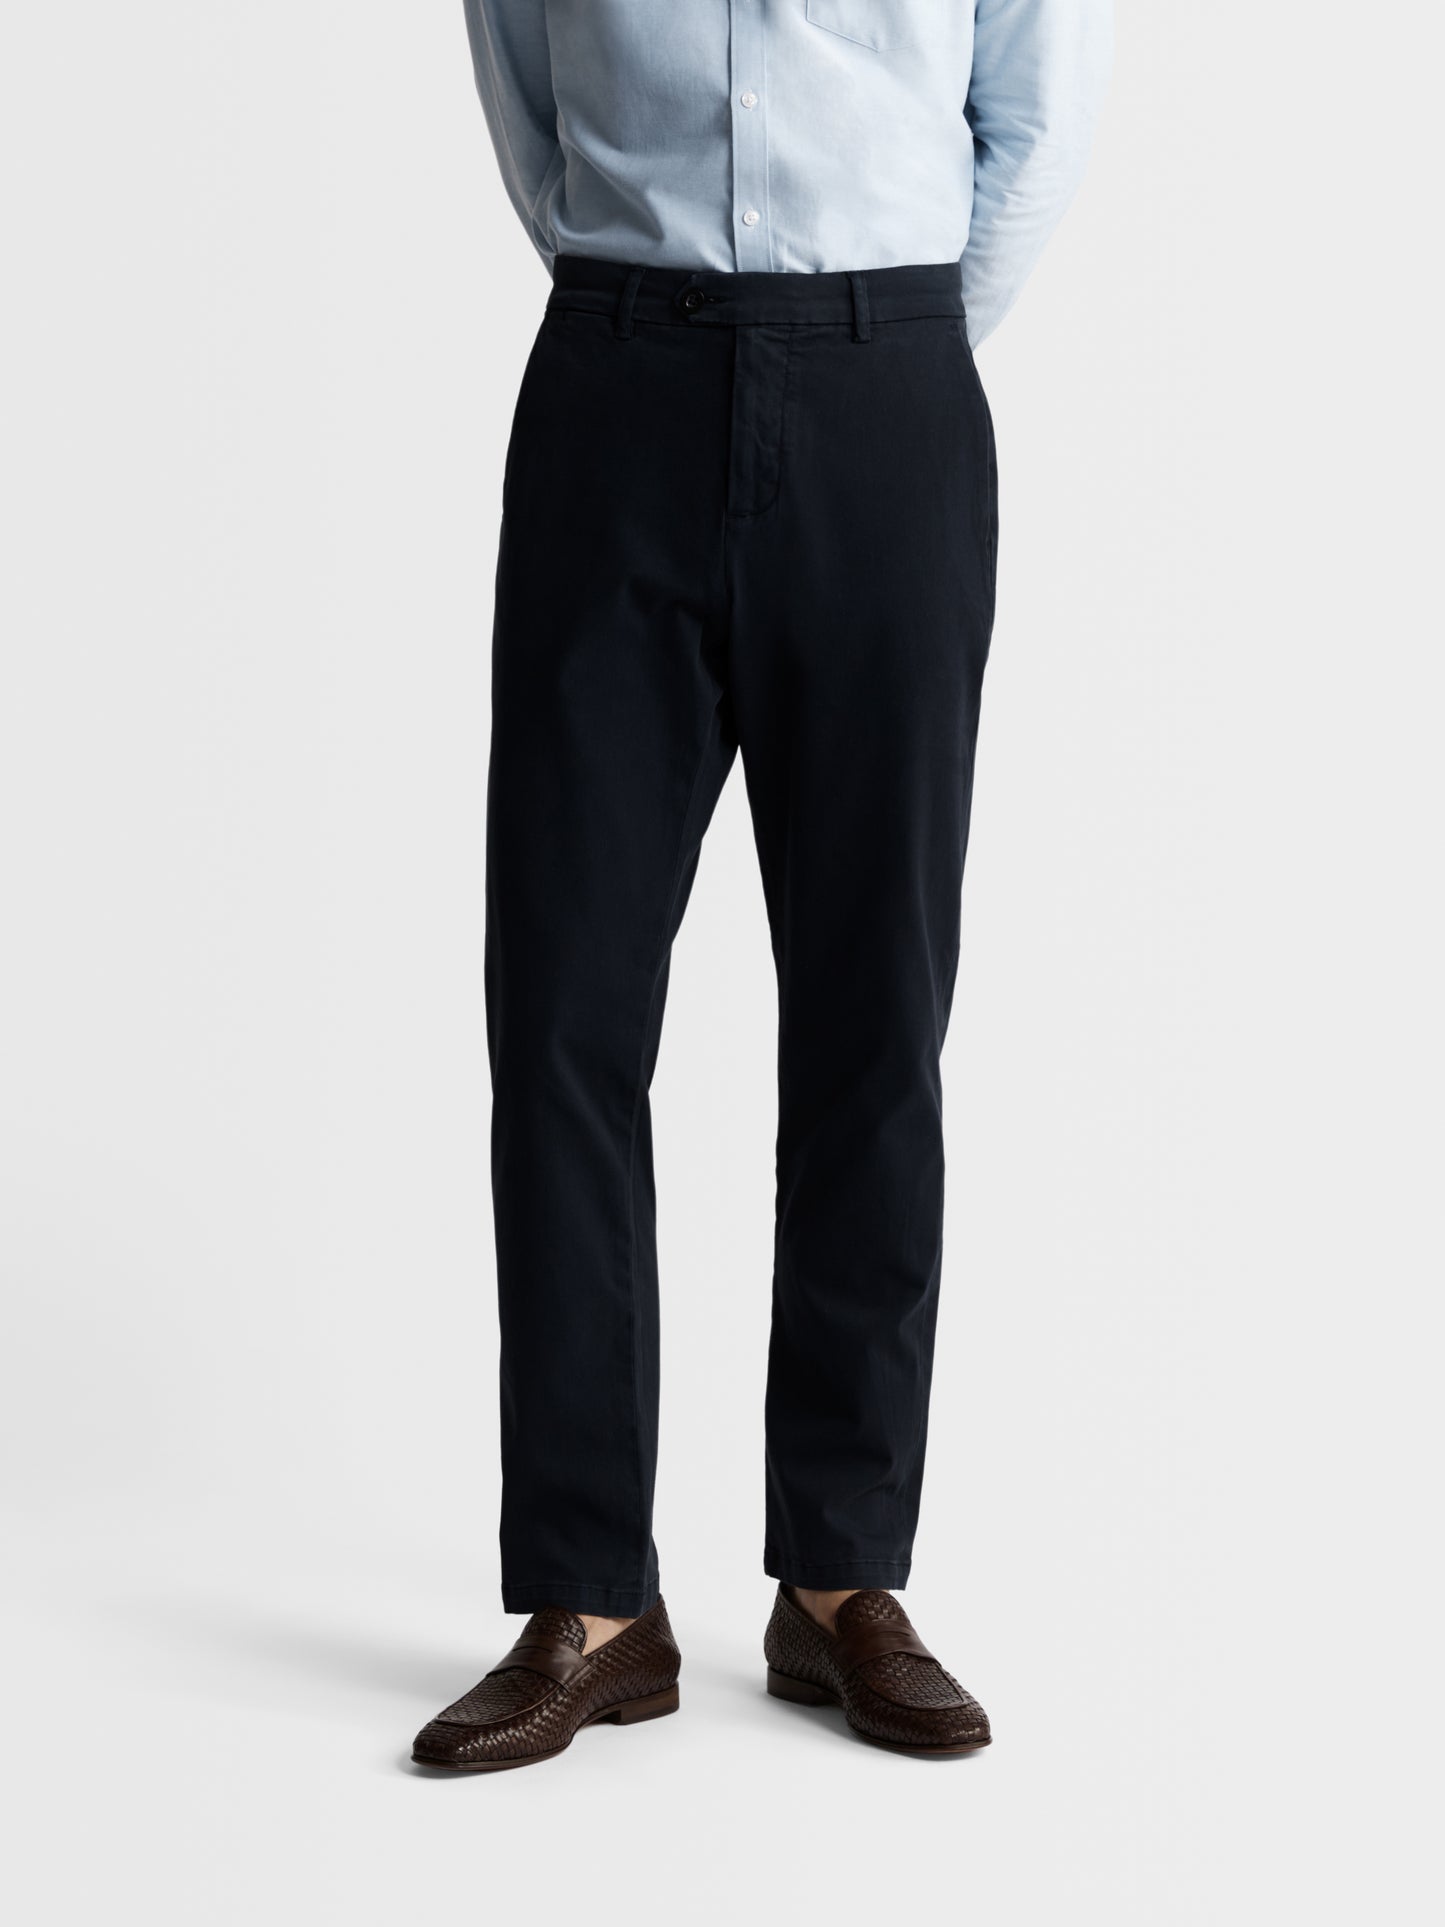 Image 1 of Slim Fit Navy Blue Chinos